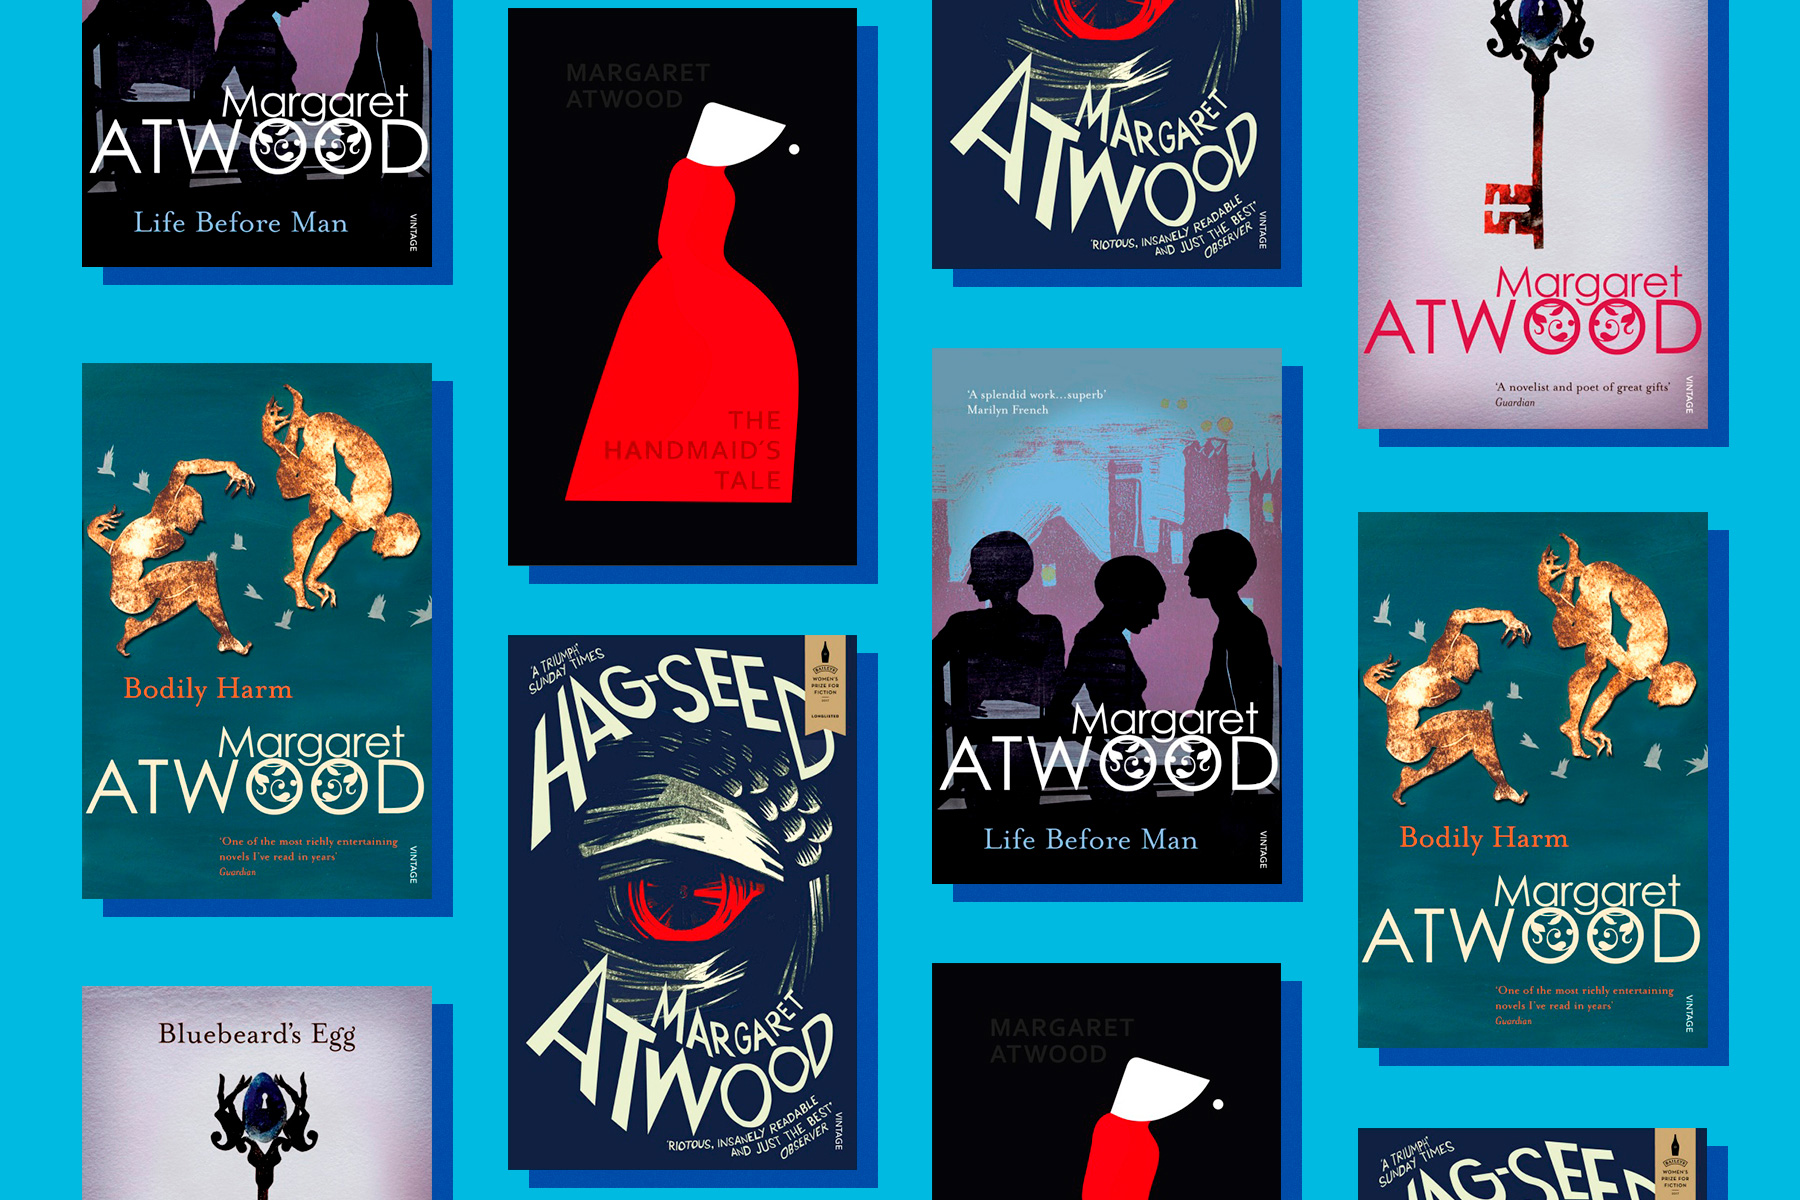 /content/dam/prh/articles/adults/2020/august/Margaret-Atwood-essential-reading-list.jpg